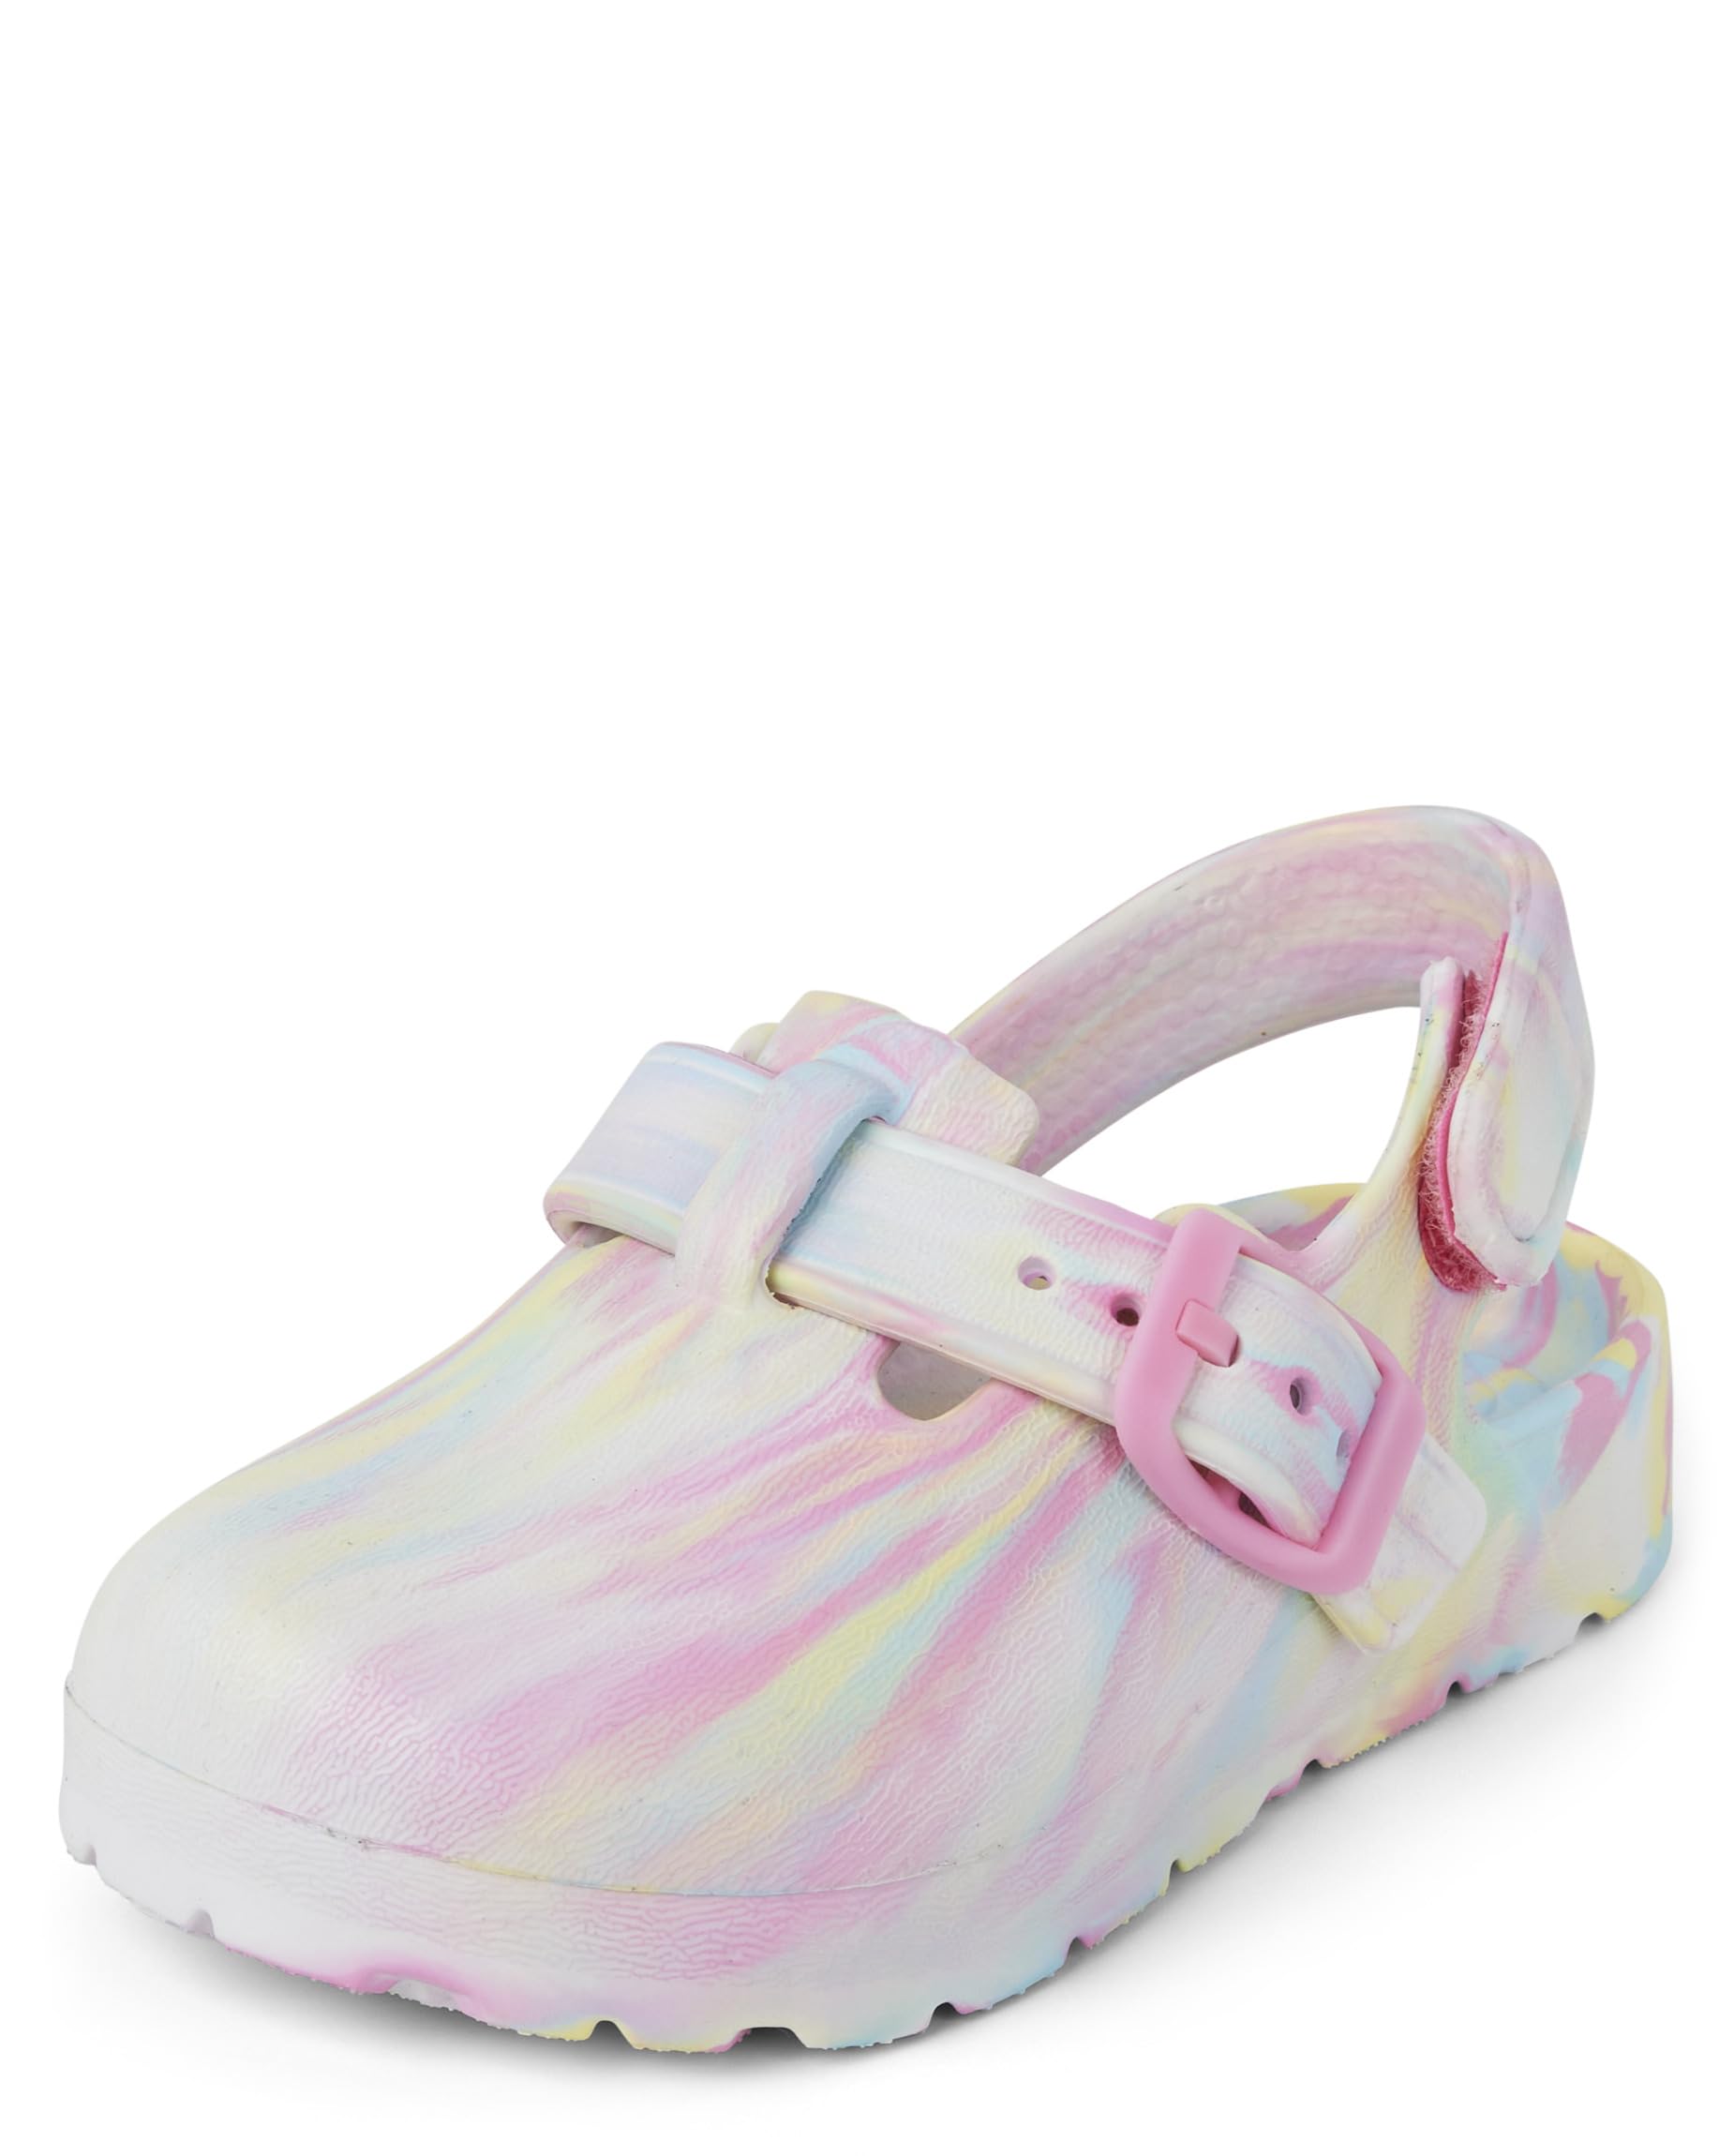 The Children's Place Girl's Baby Toddler Closed Toe Clogs with Backstrap Sandal